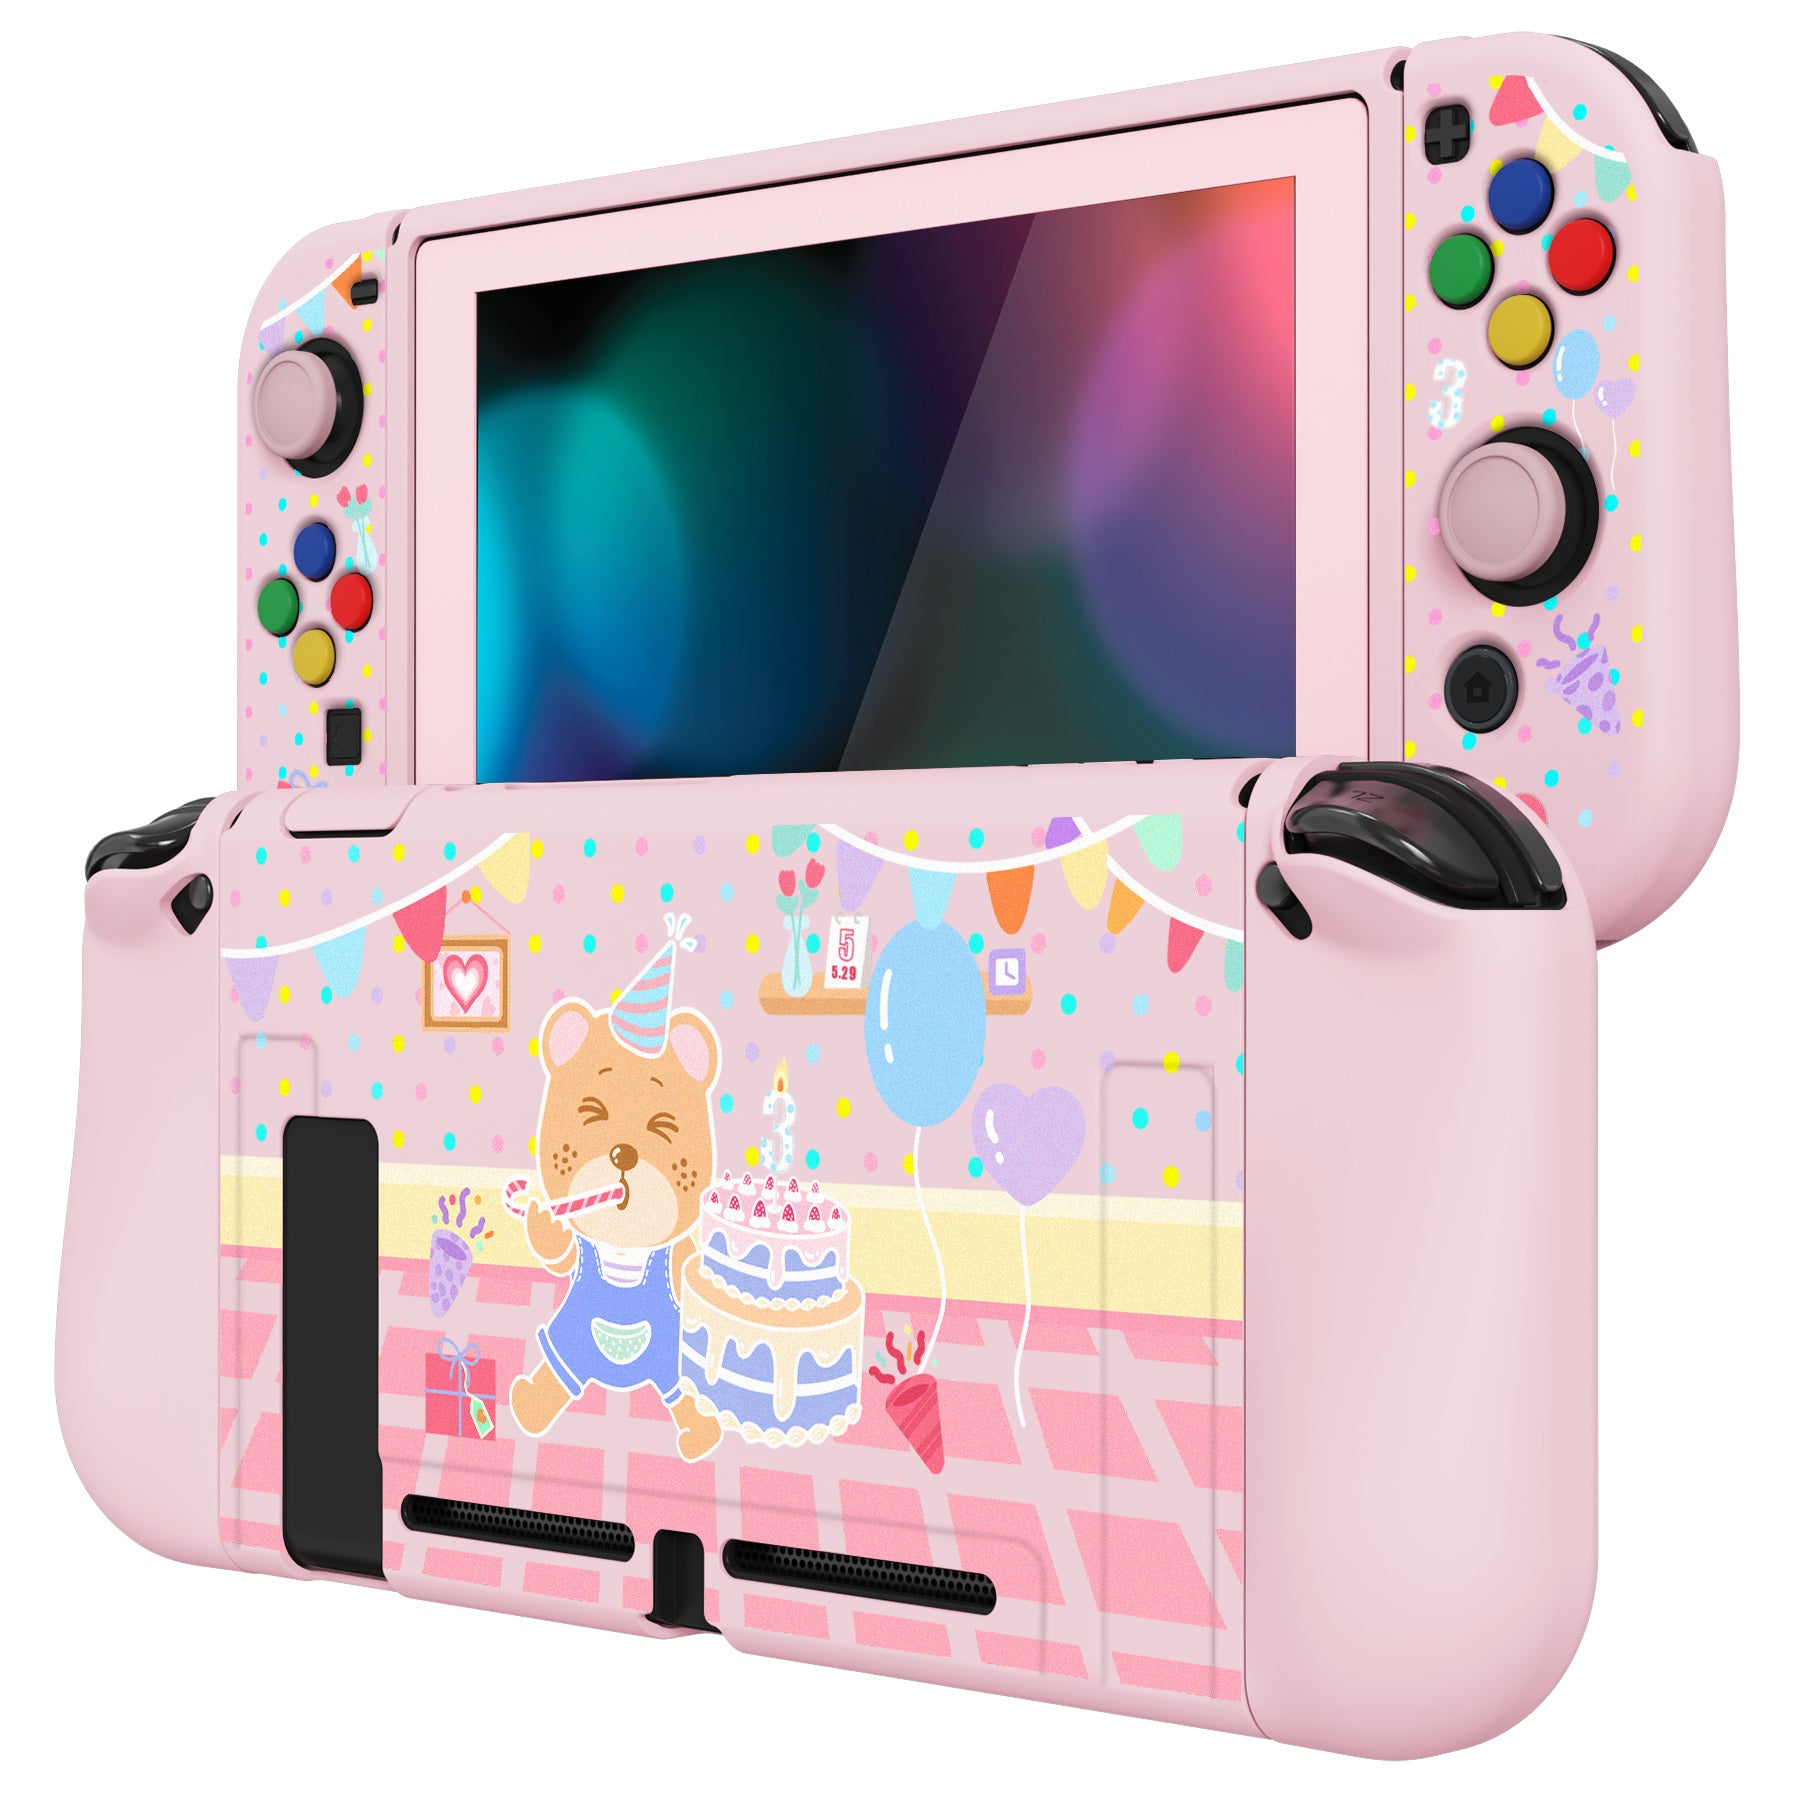 PlayVital ZealProtect Soft Protective Case for Nintendo Switch, Flexible Cover for Switch with Tempered Glass Screen Protector & Thumb Grips & ABXY Direction Button Caps - Birthday Party - RNSYV6009 playvital